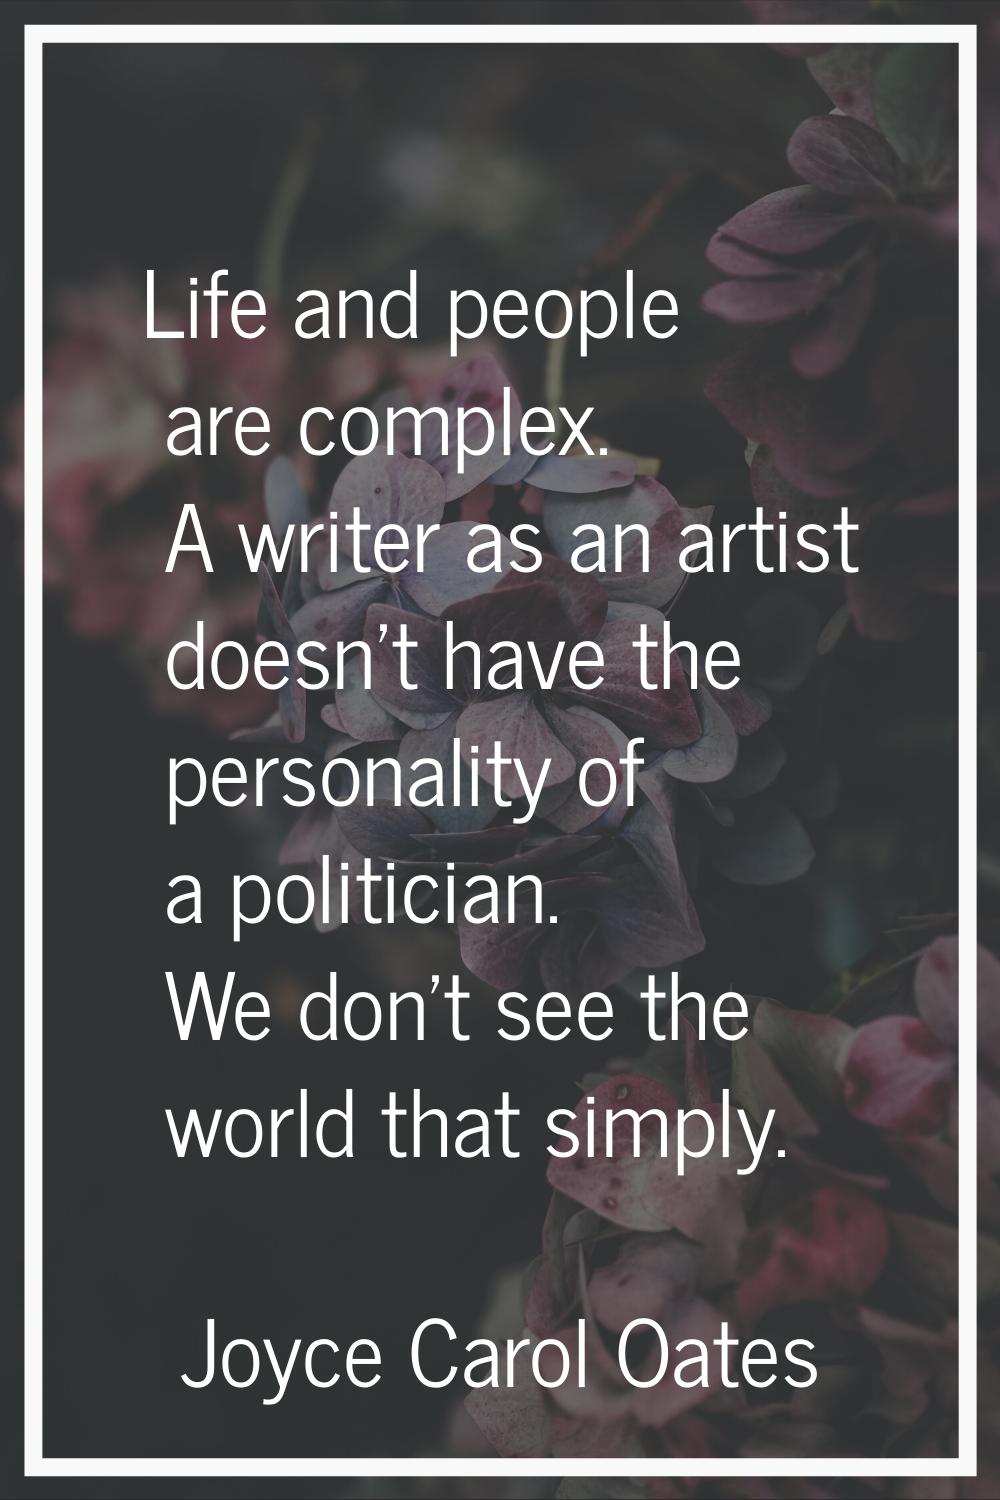 Life and people are complex. A writer as an artist doesn't have the personality of a politician. We